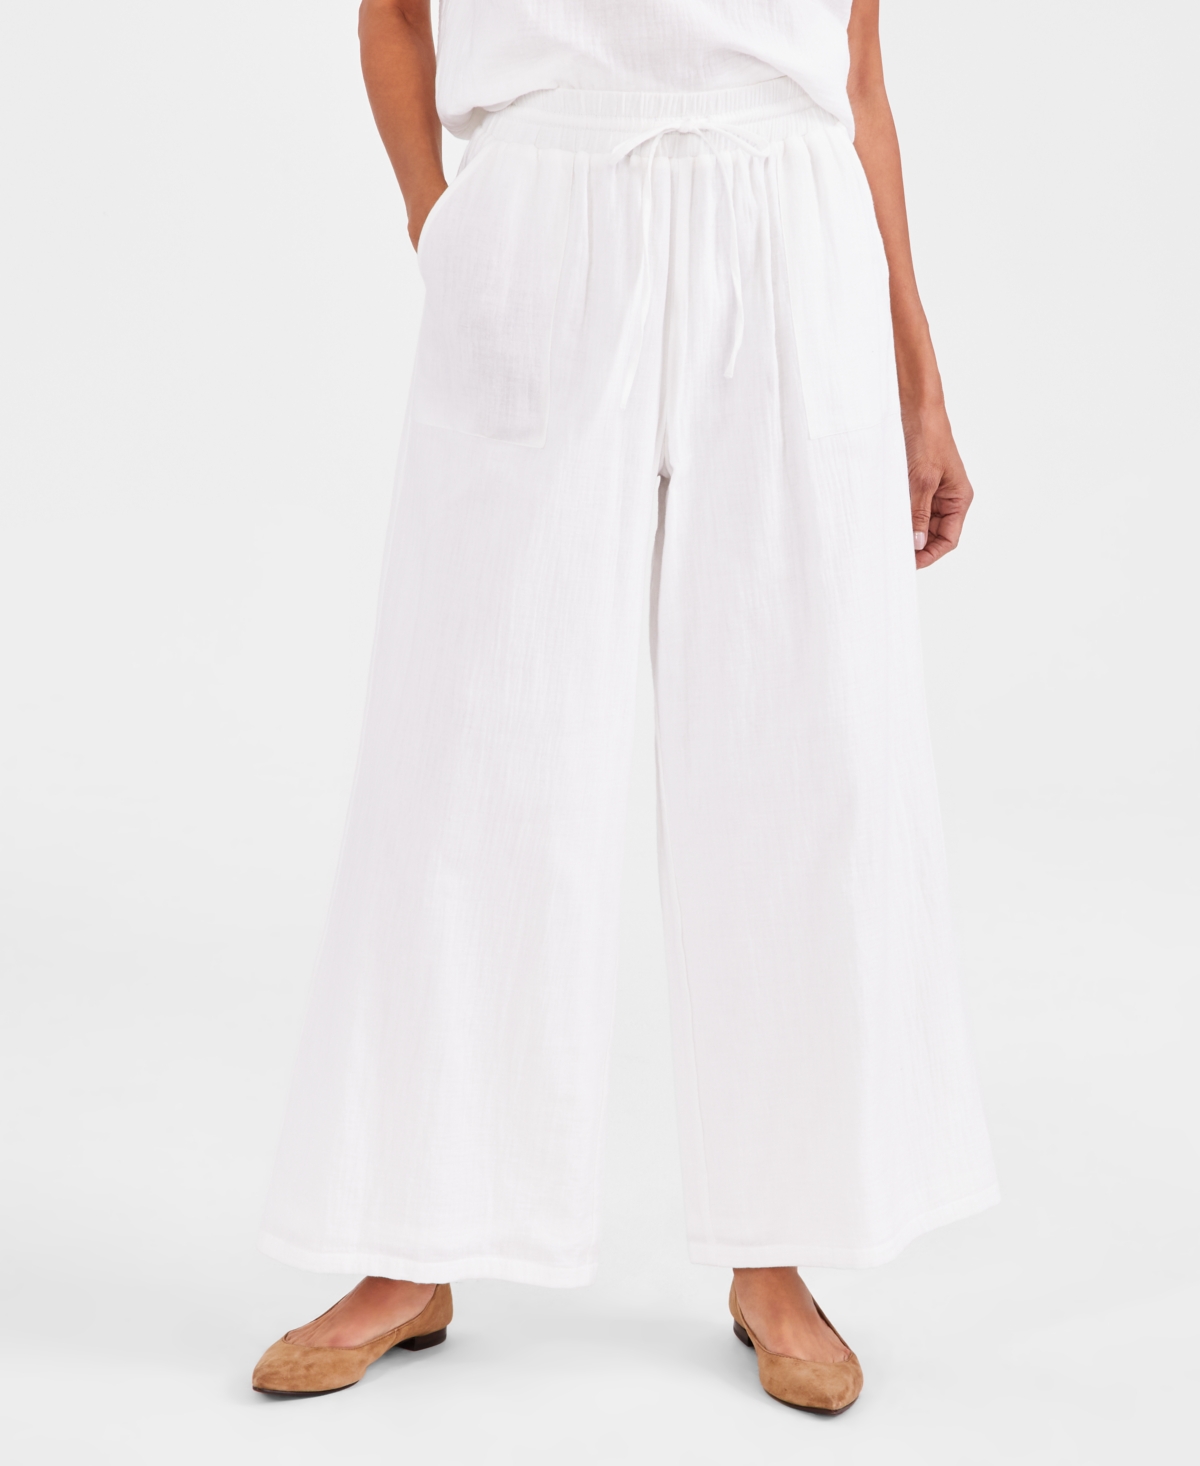 Women's Cotton Gauze Wide-Leg Pants, Created for Macy's - Bright White